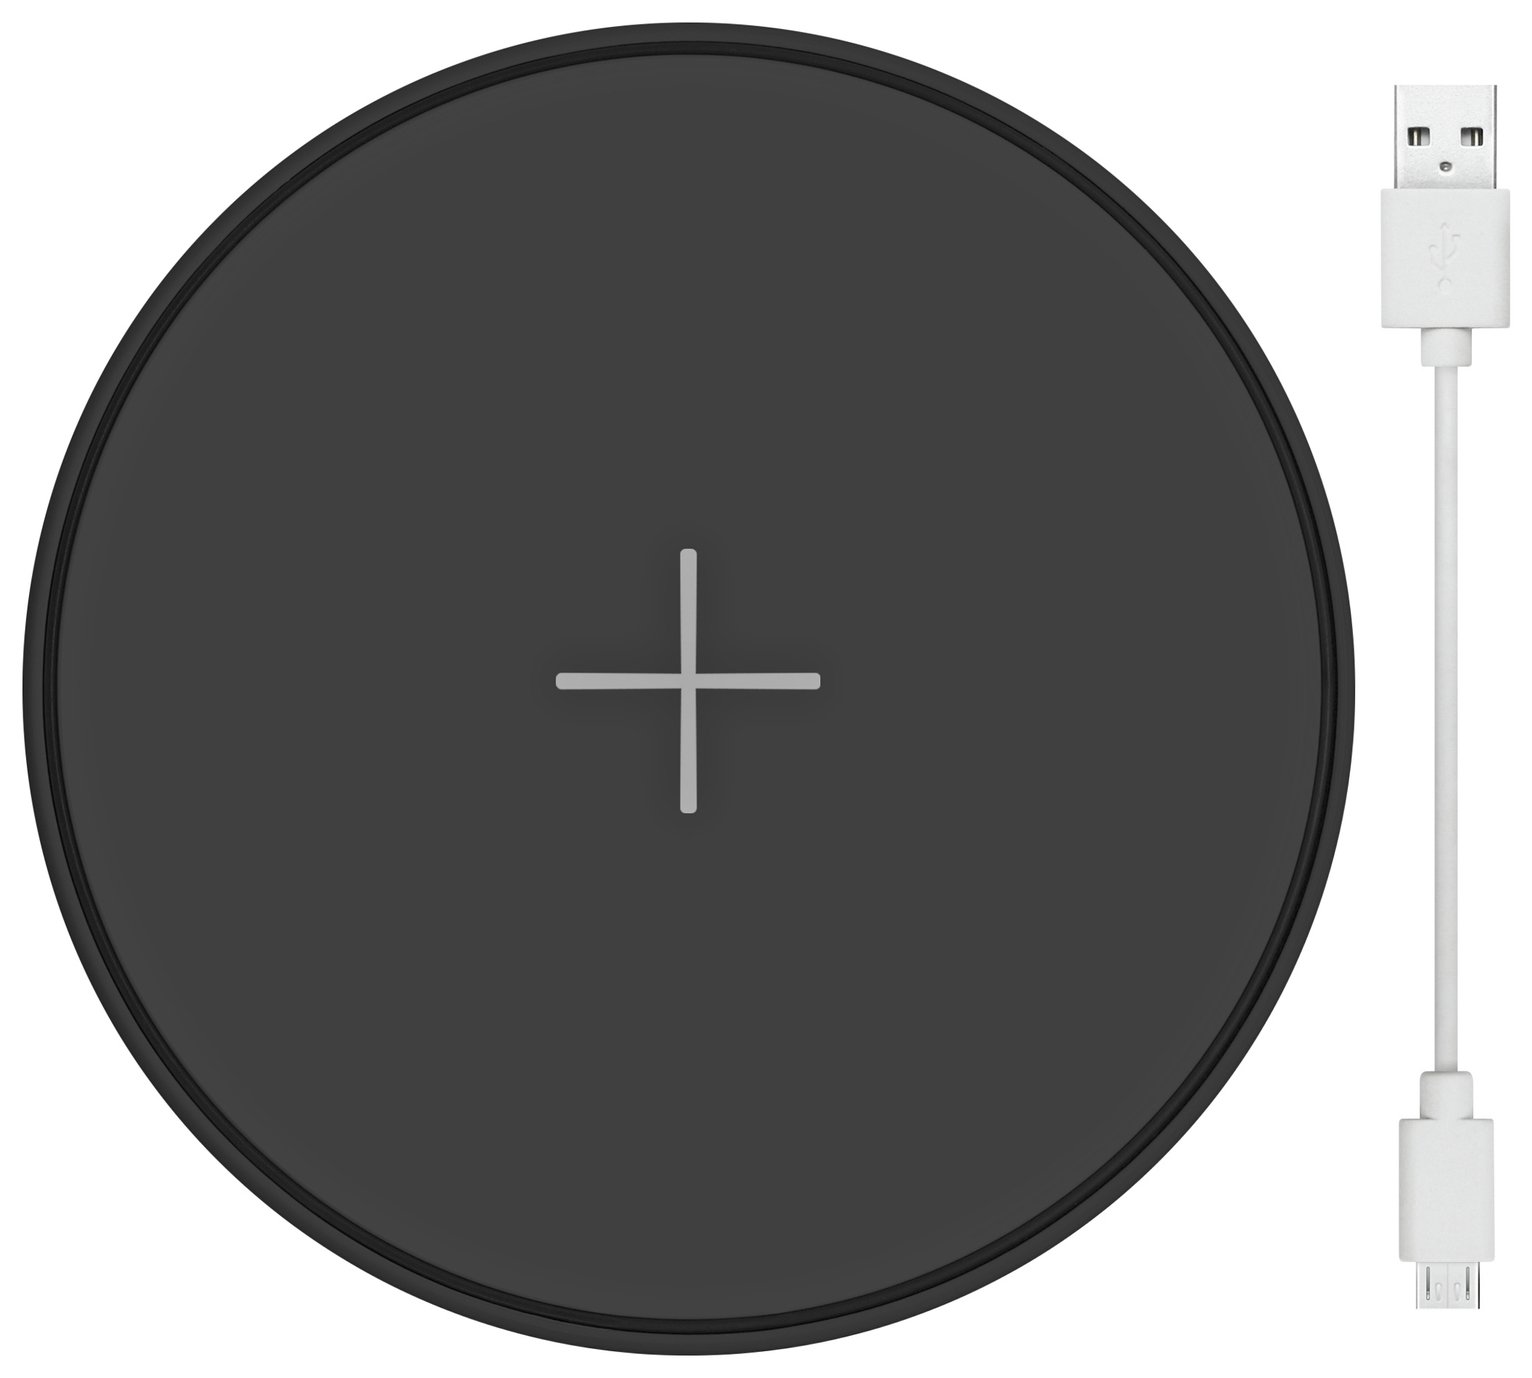 Juice Pad Qi Enabled 10W Wireless Charger Review